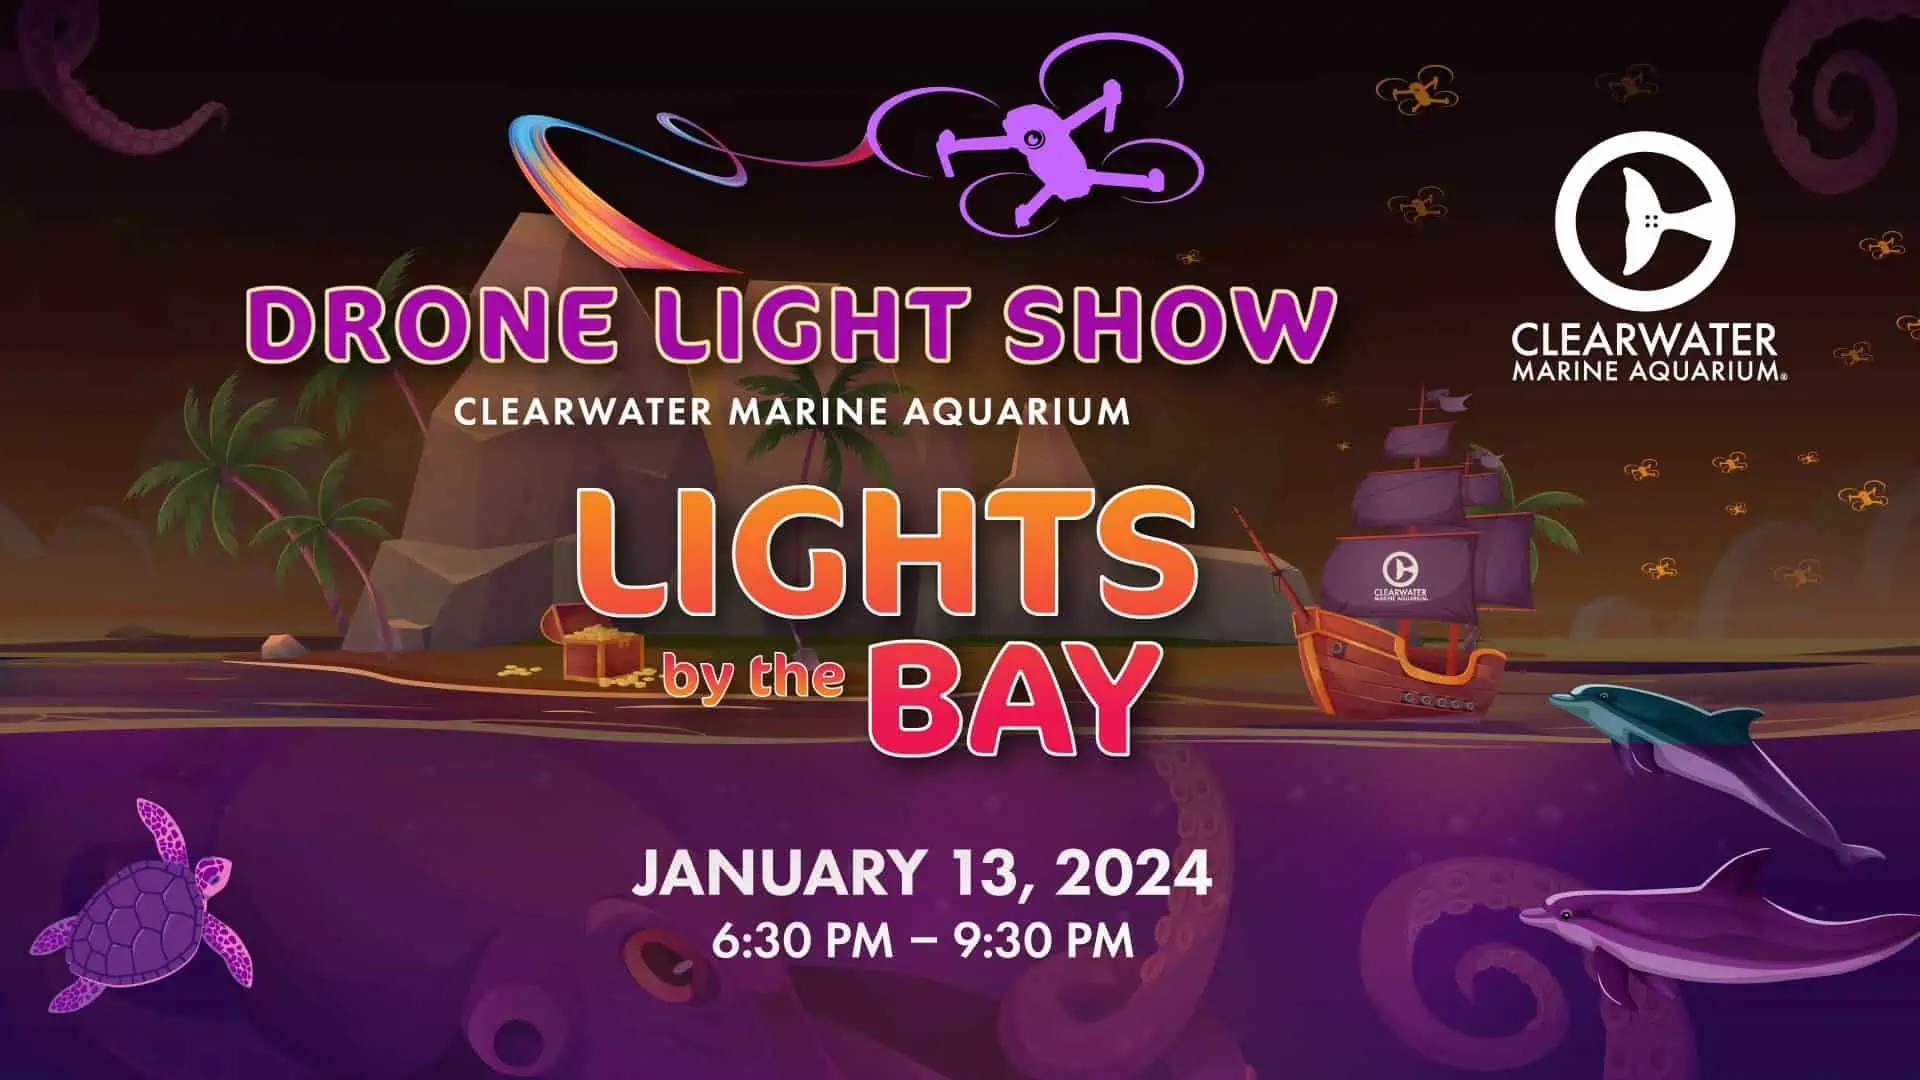 Lights by the Bay Drone Show at the Clearwater Aquarium on January 13 6:30pm-9:30pm